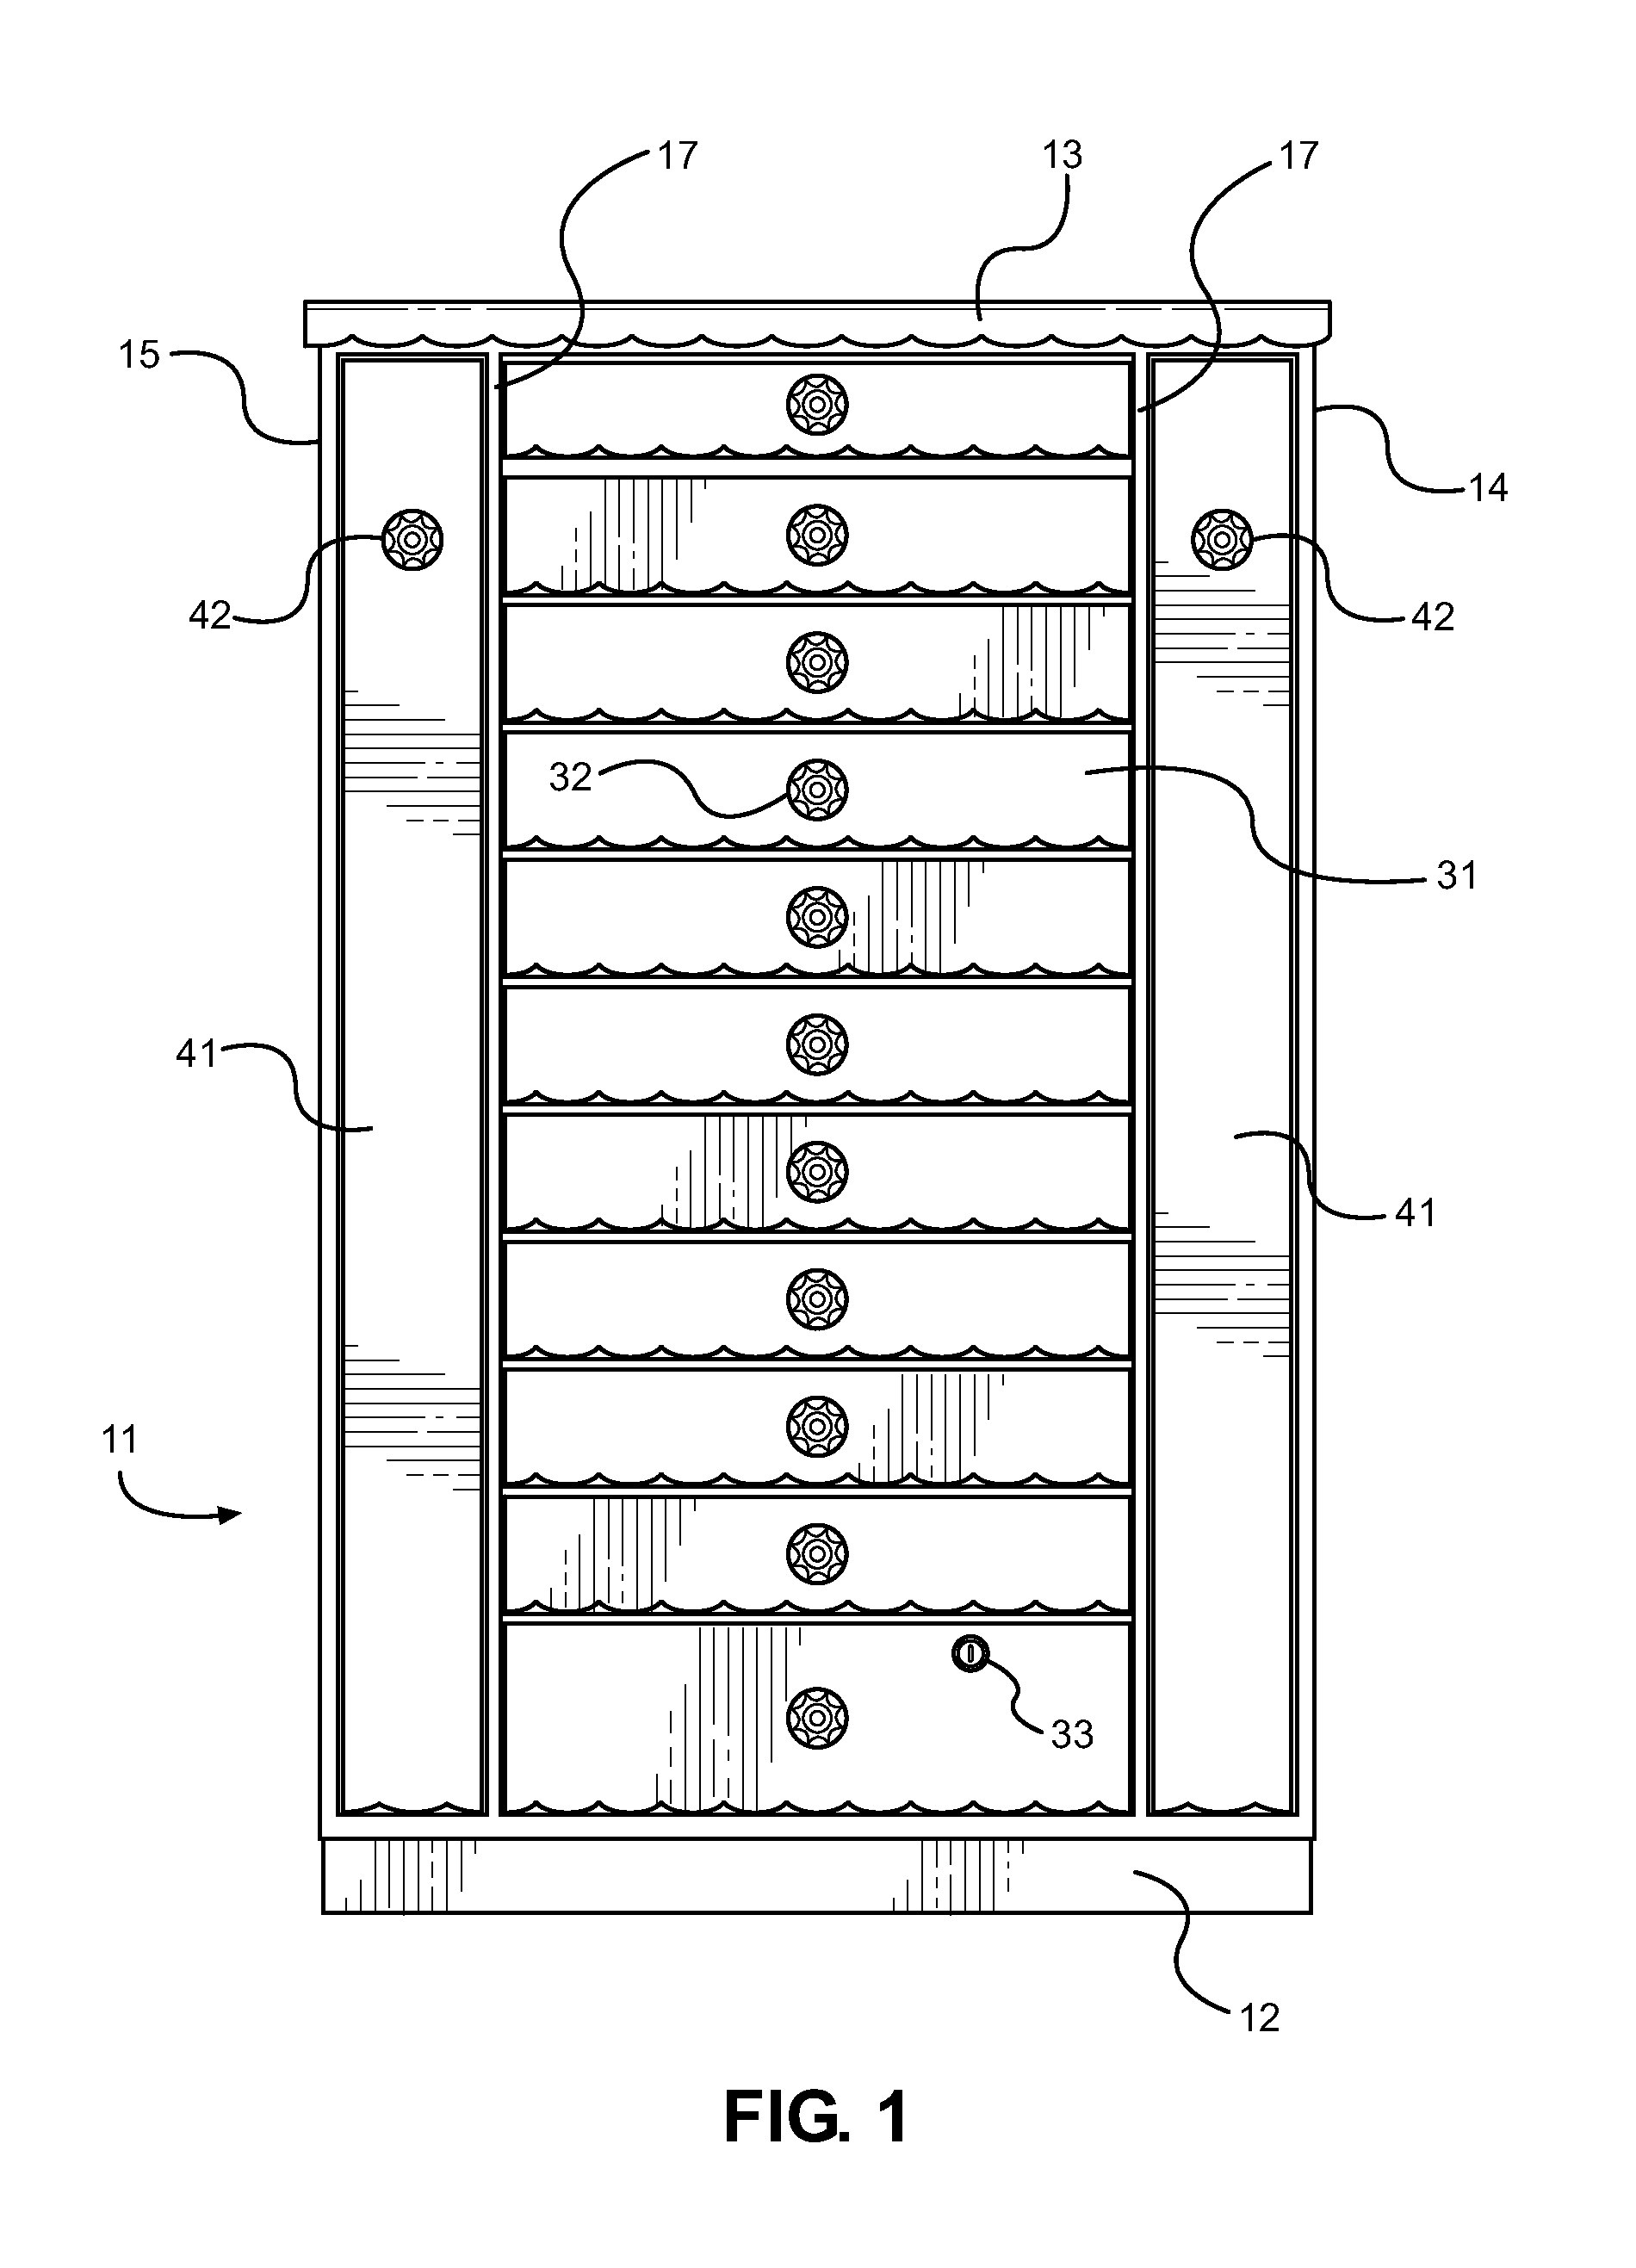 Jewelry and Accessory Storage Cabinet and Method of Organization